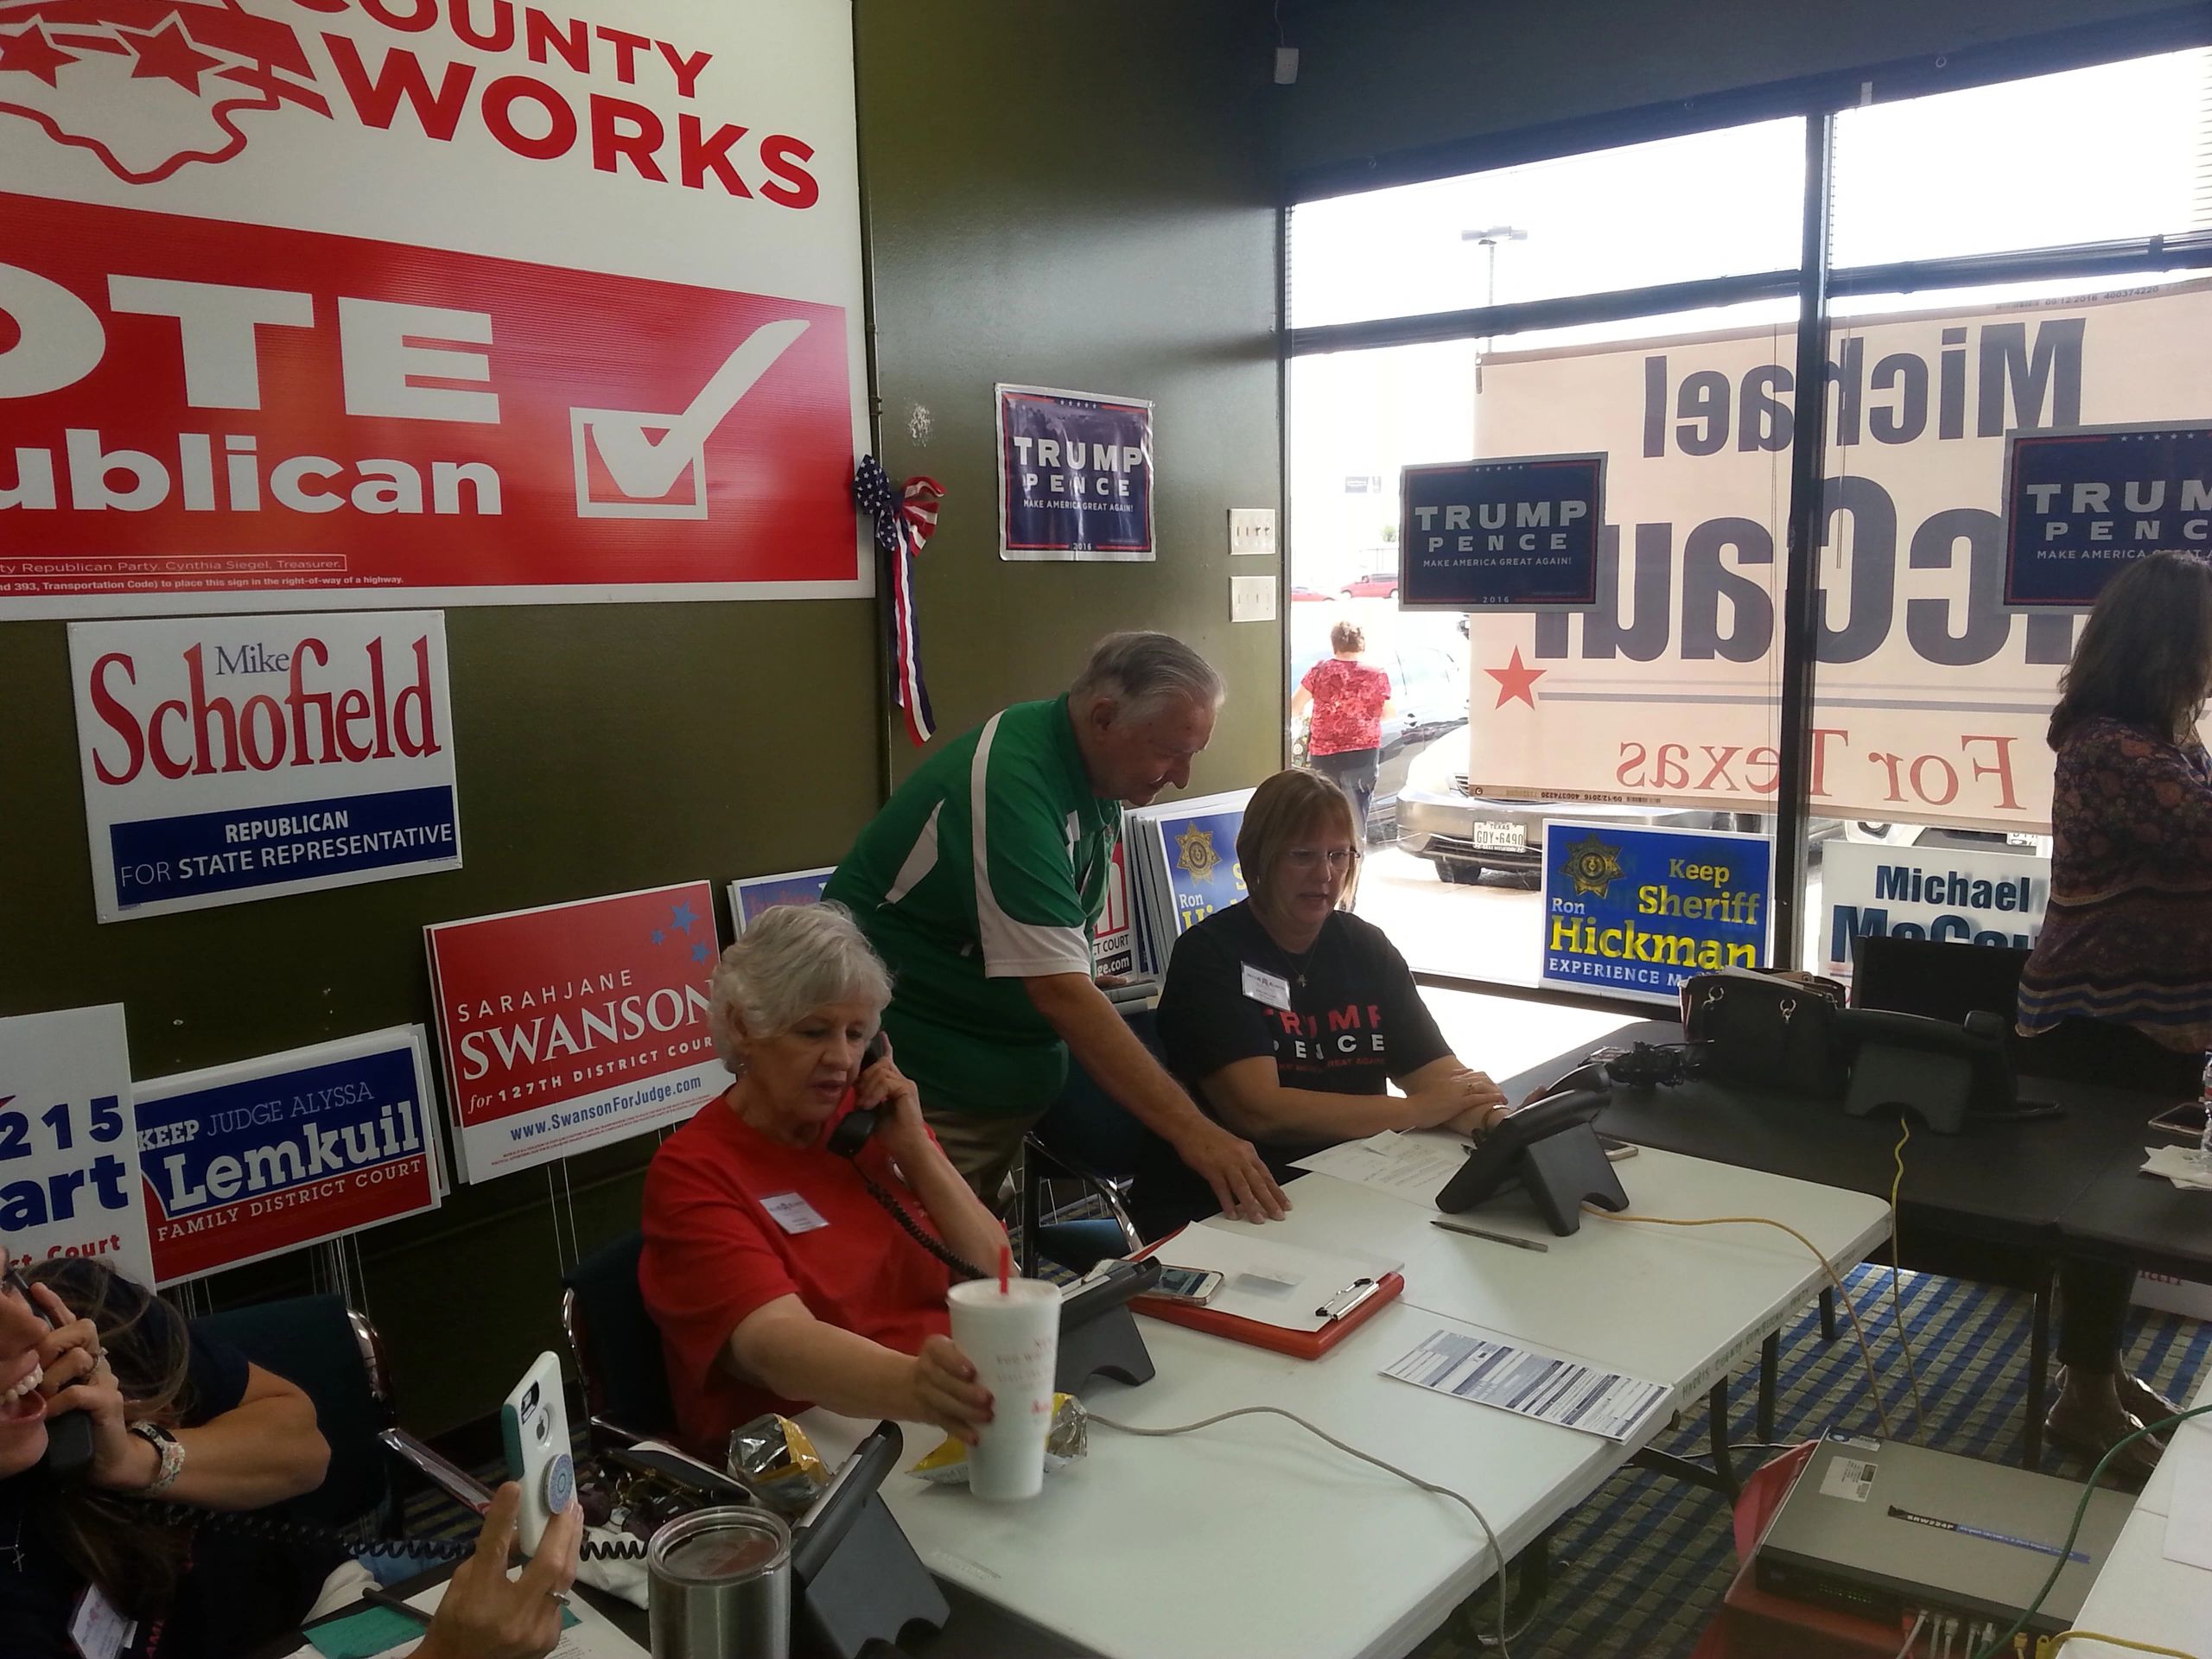 Volunteers manning telephones and helping coordinate campaign events.
